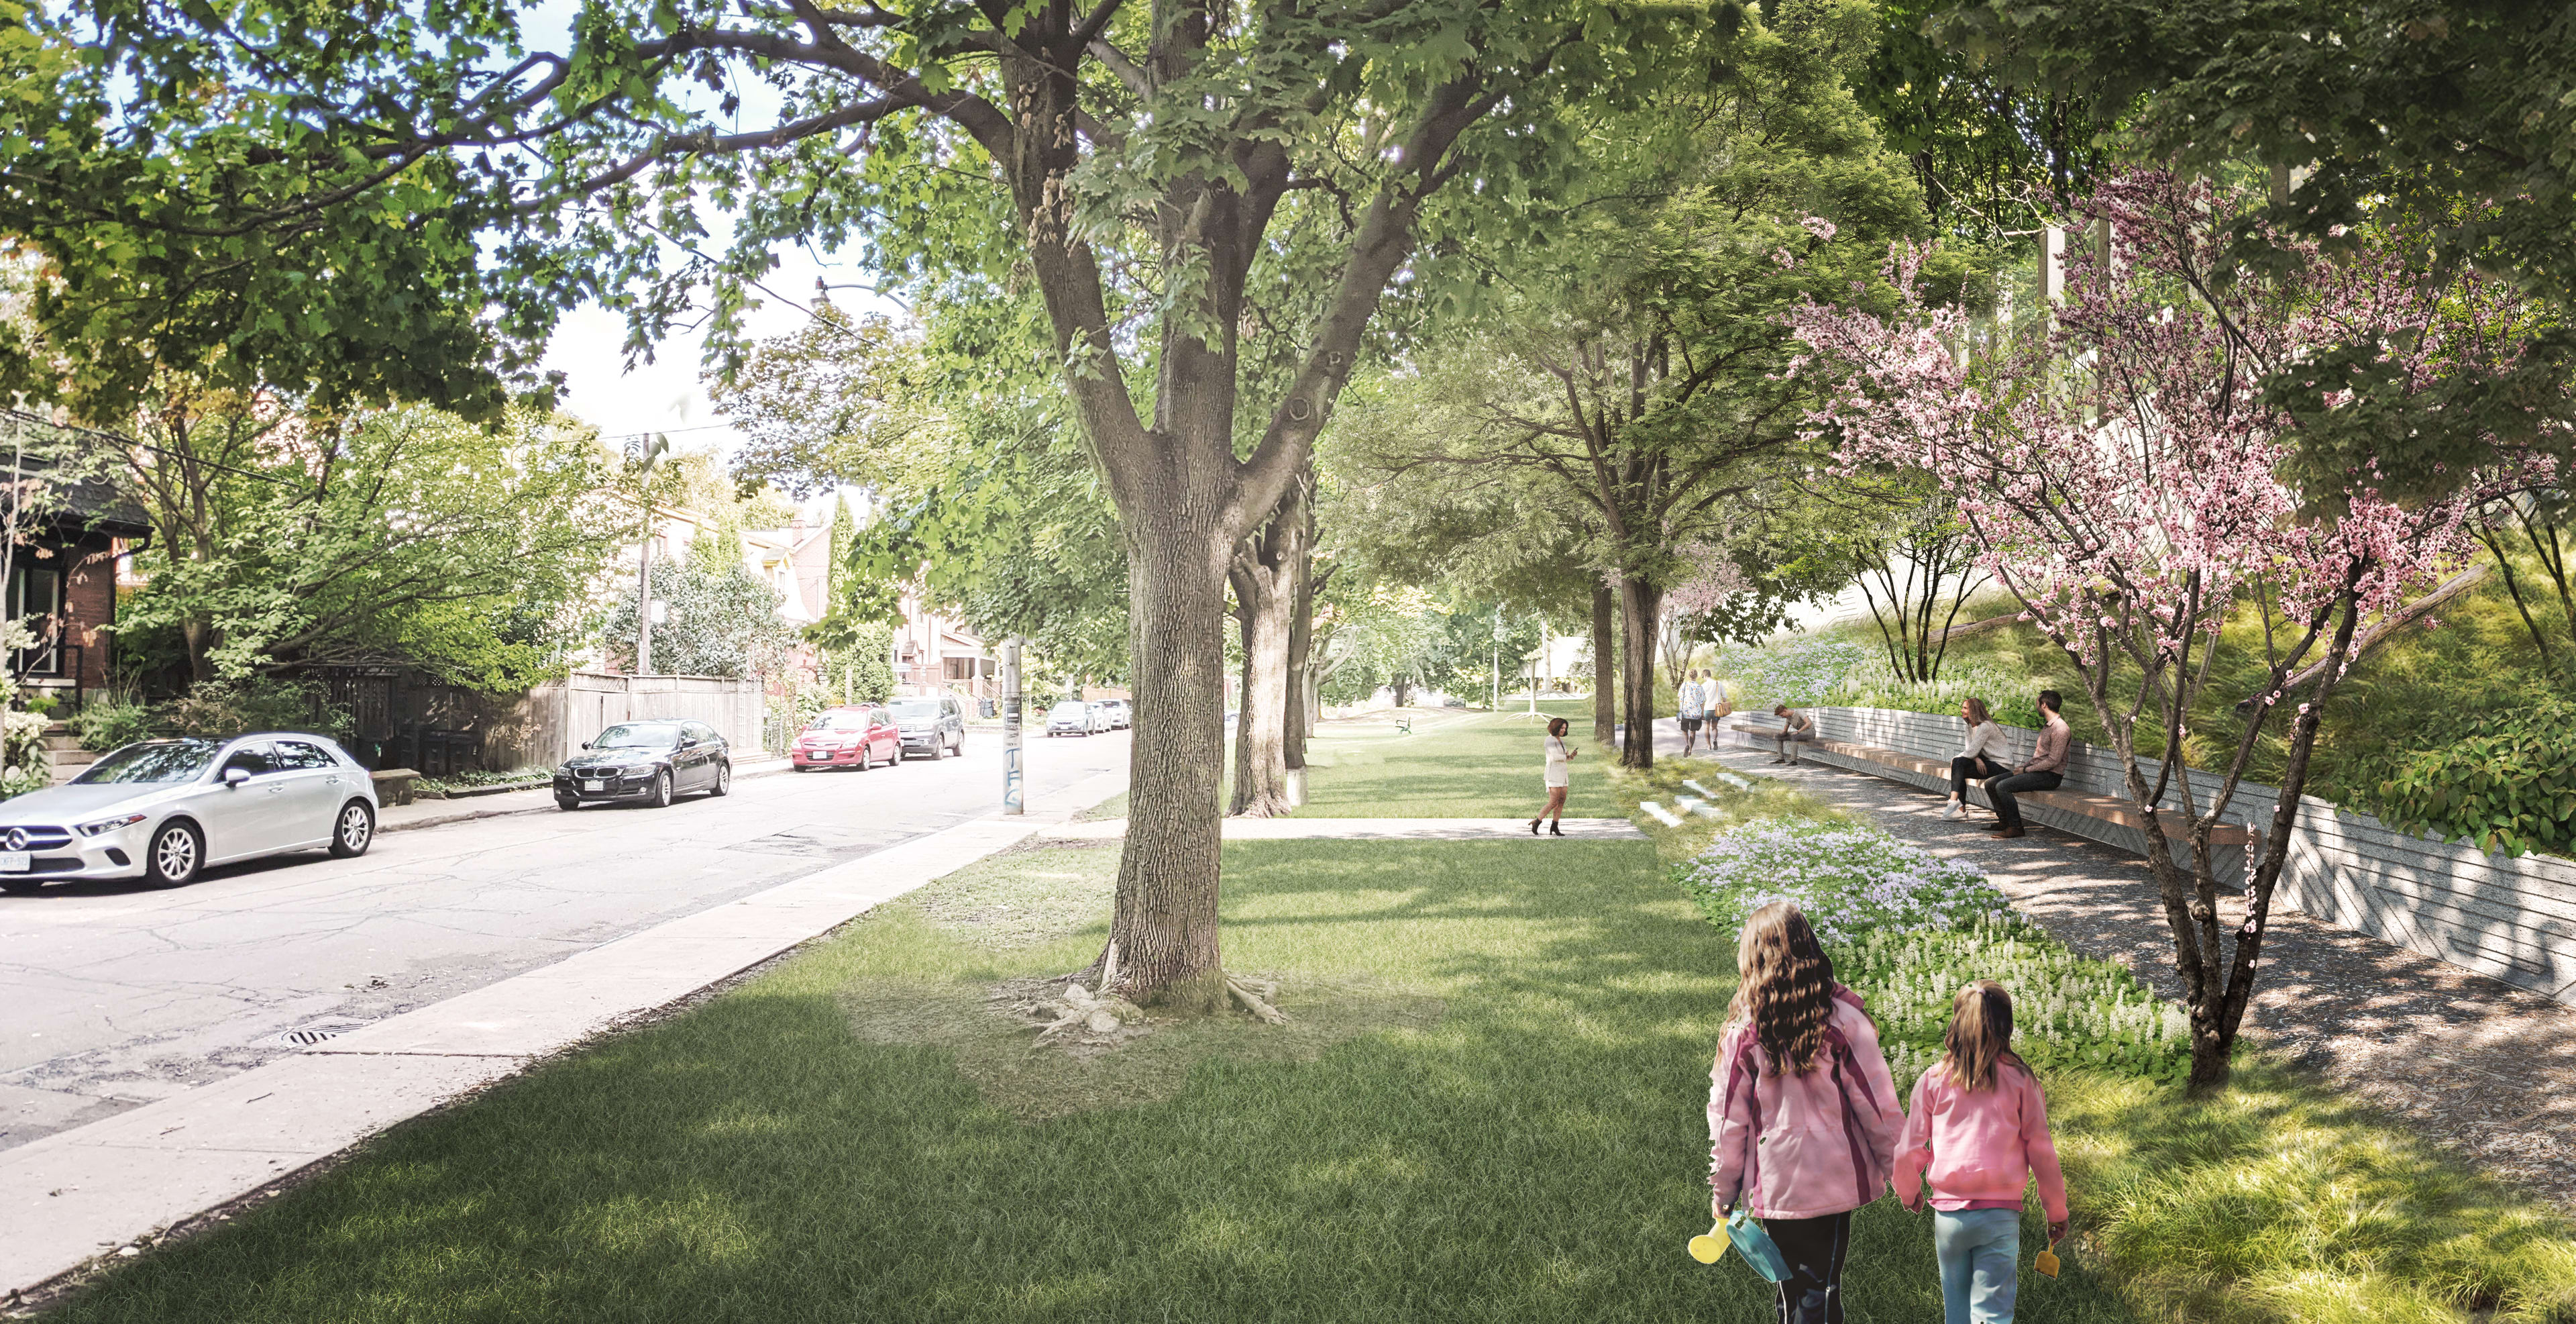 Ontario Line rendering of Bruce Mackey Park - from the joint corridor design competition